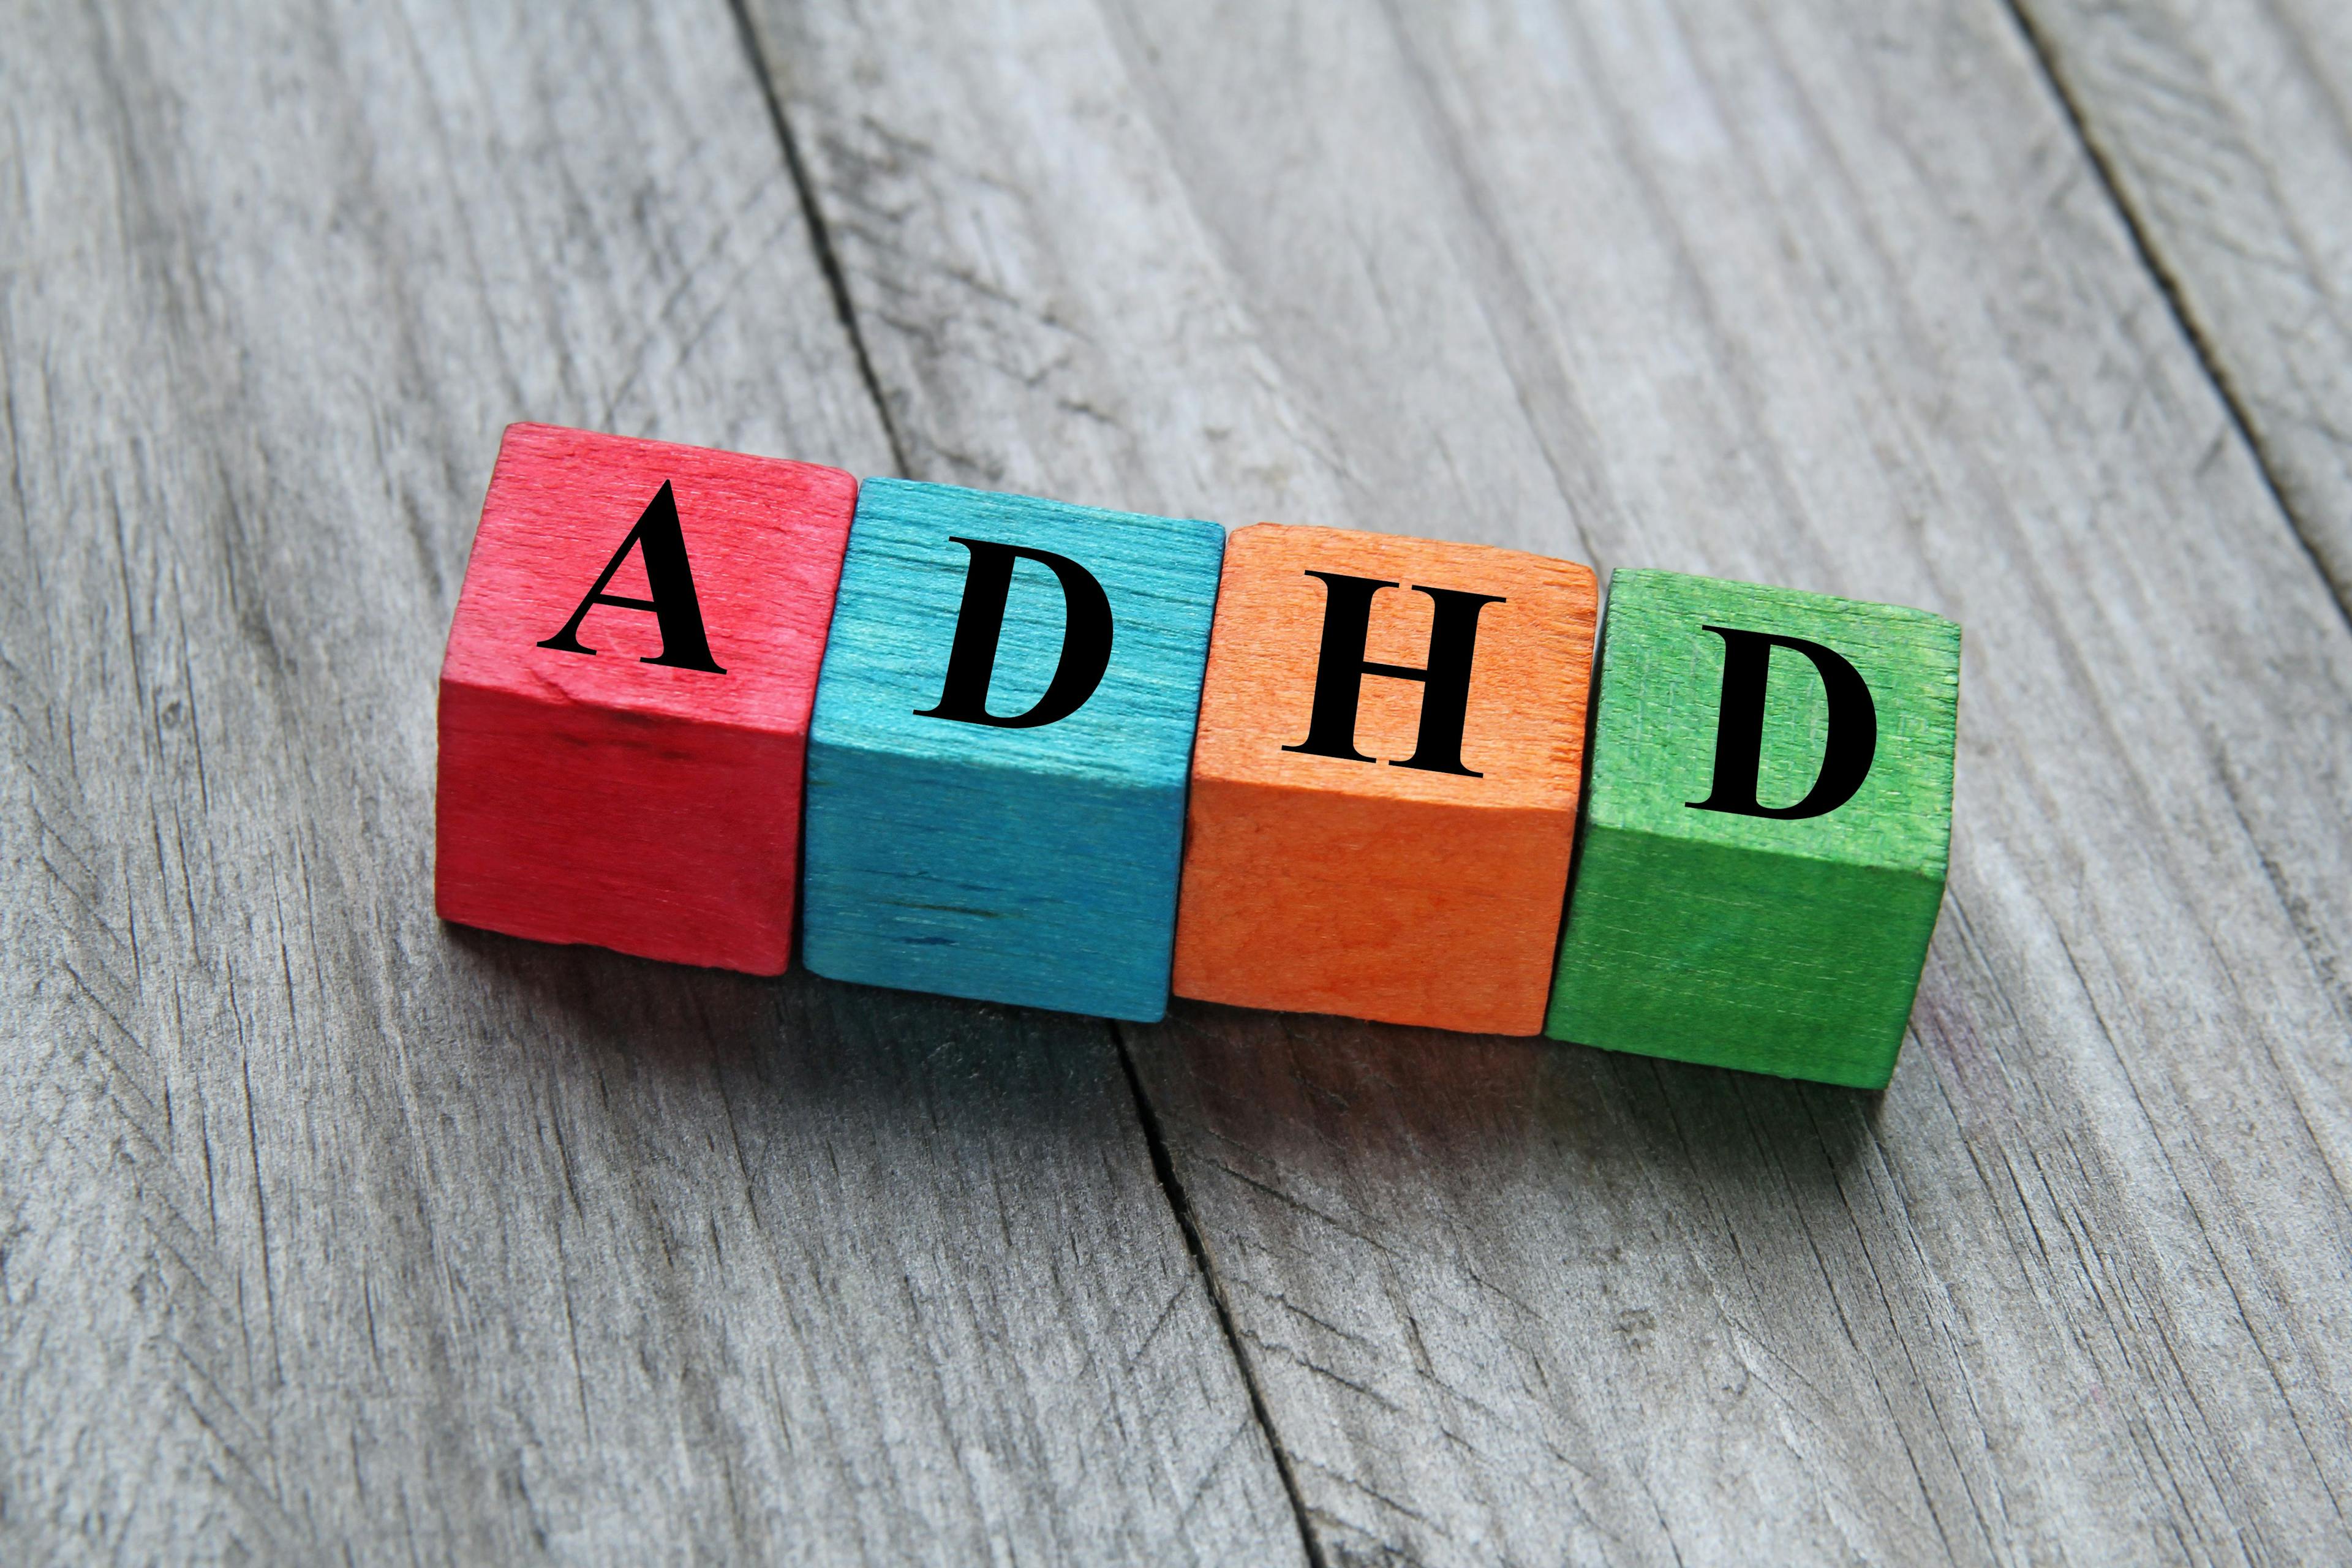 How can magic tricks help boost self-esteem in children and adolescents with ADHD?